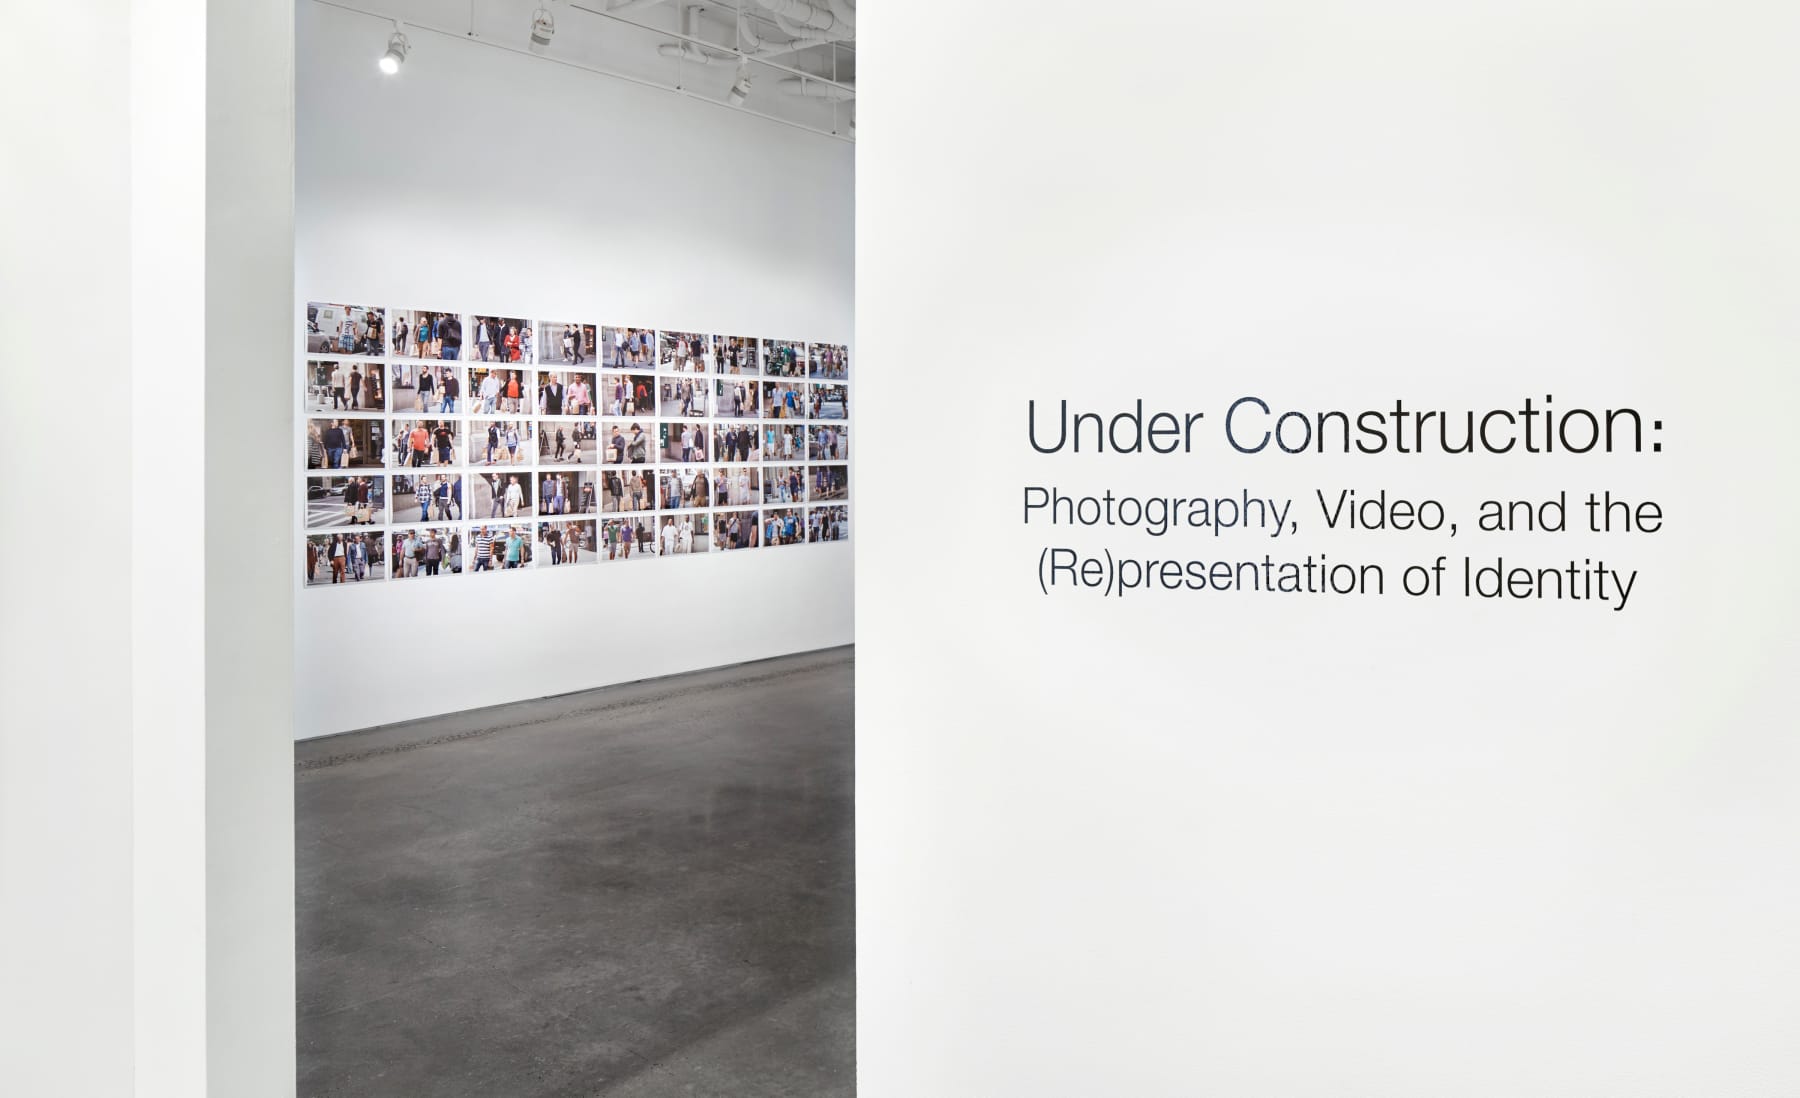 Under Construction: Photography, Video, and the (Re)presentation of Identity